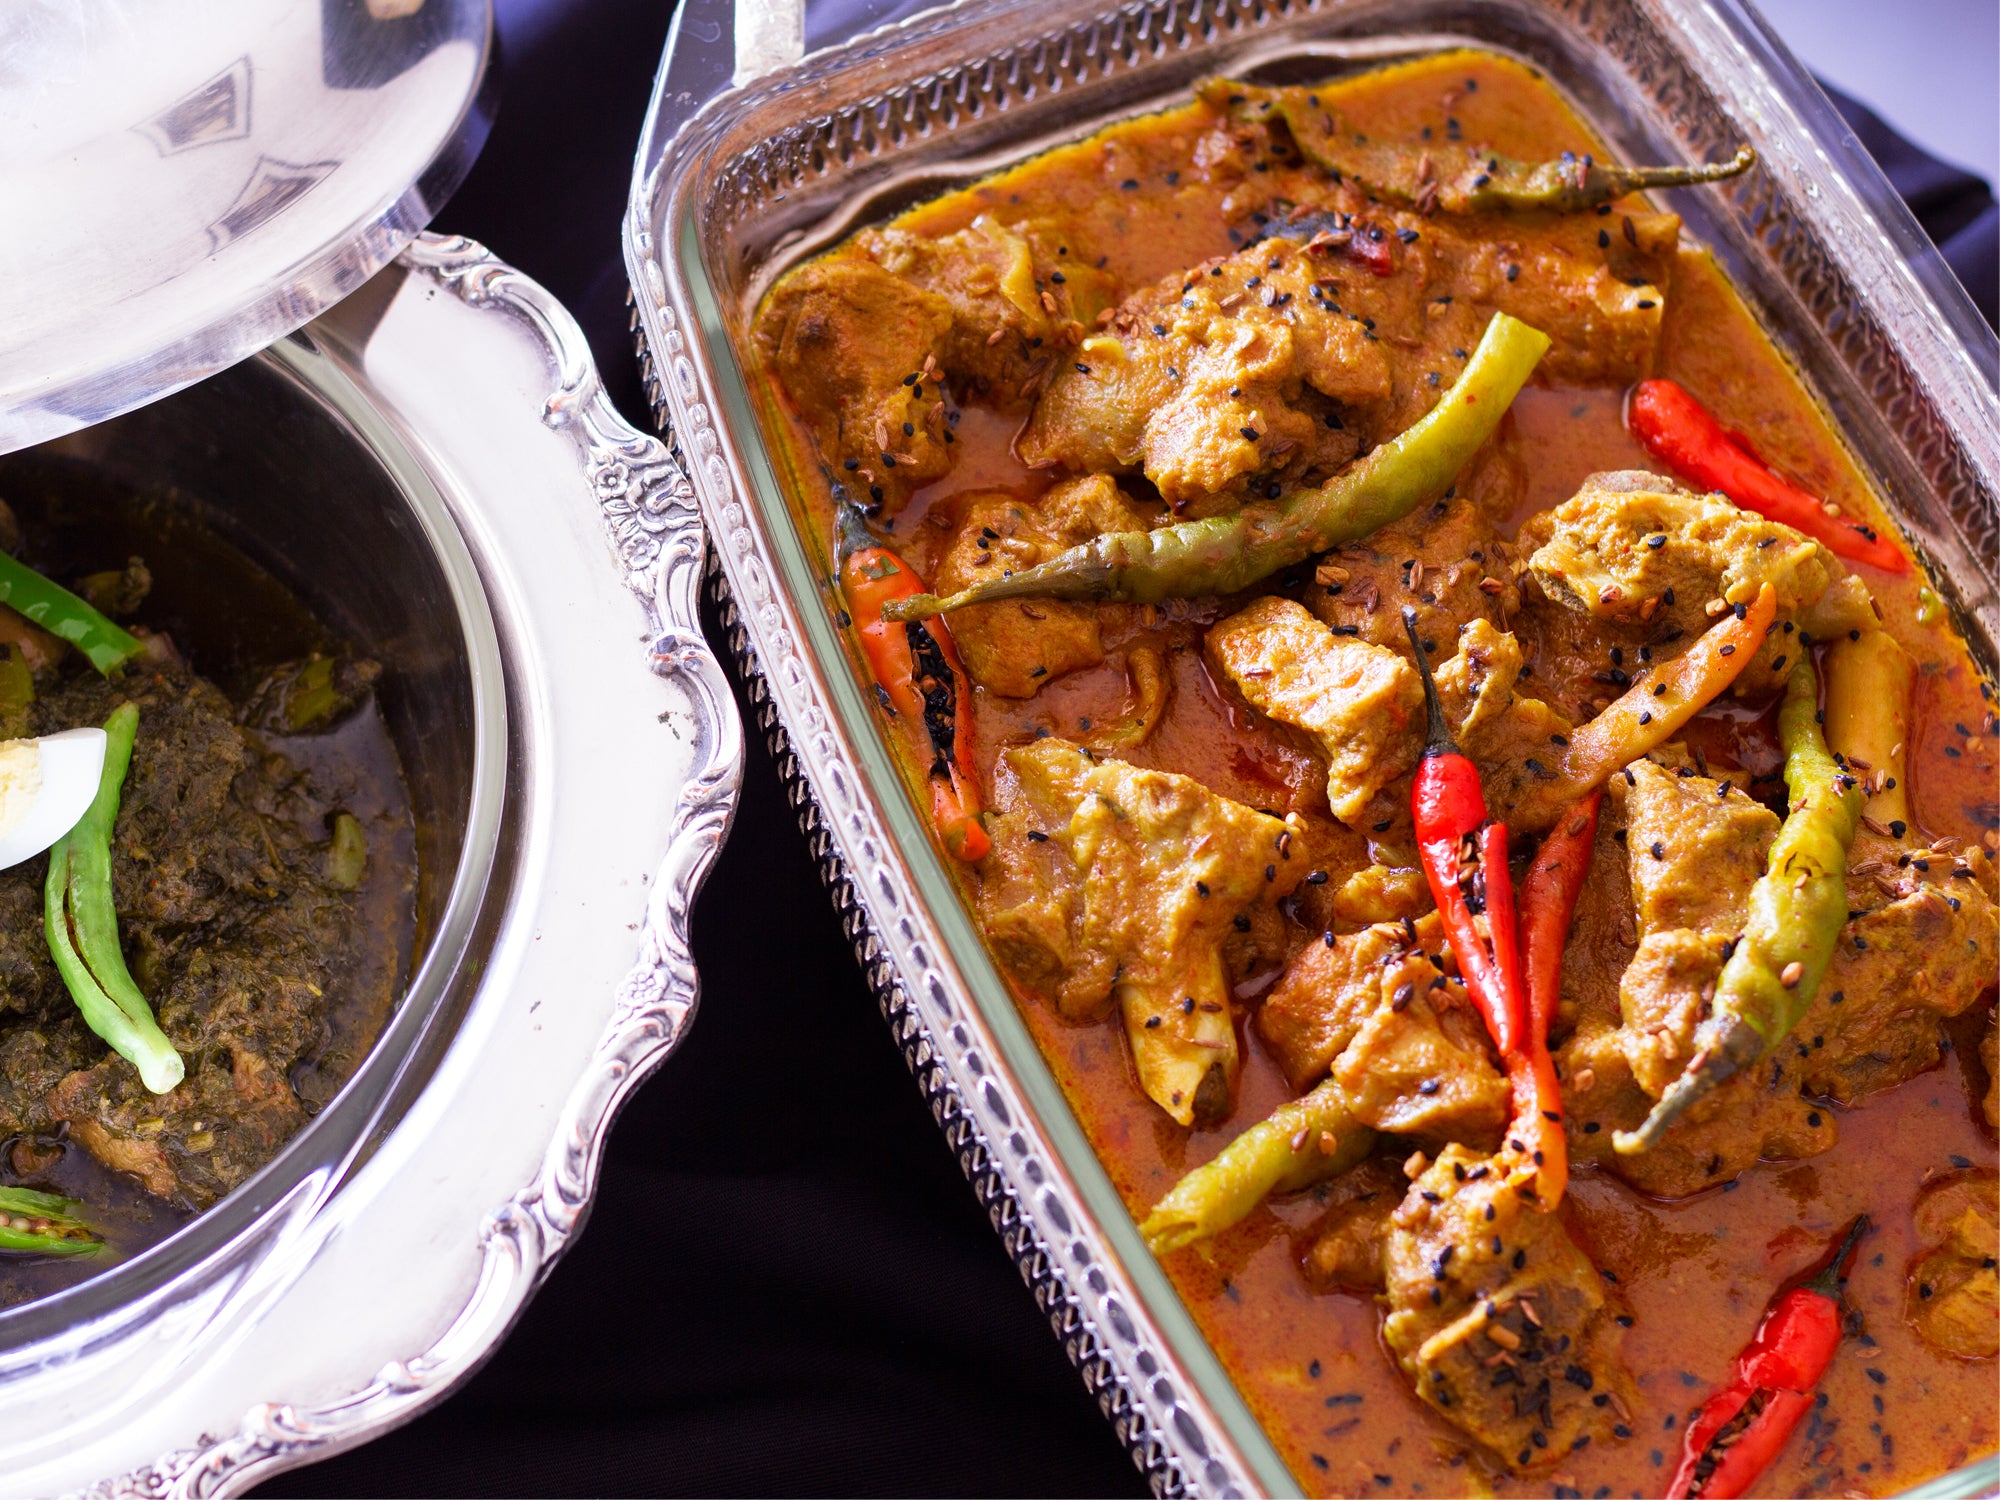 Cuisine of nawabs and begums